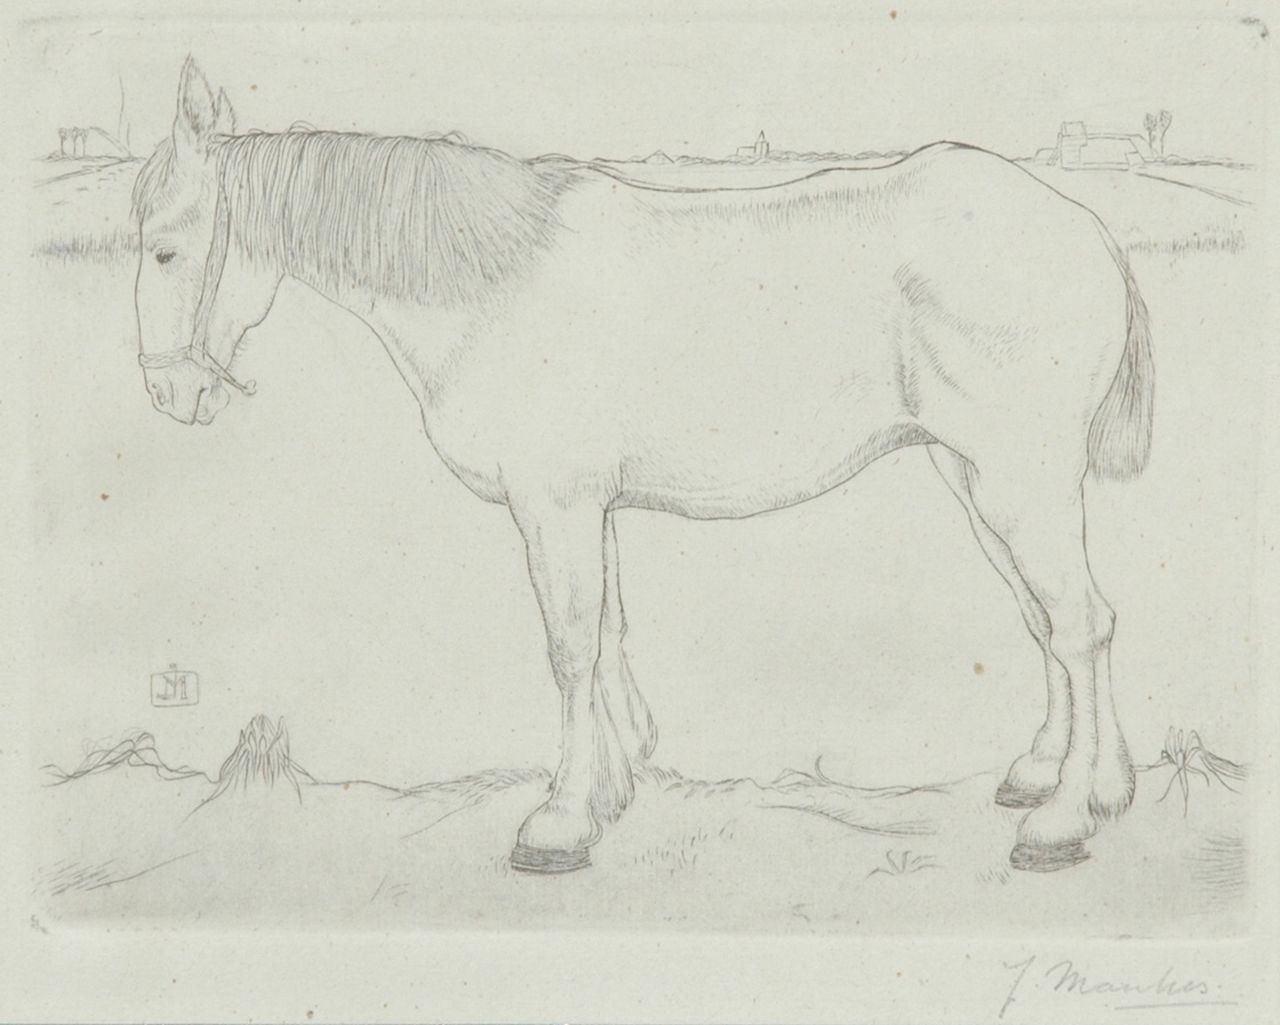 Mankes J.  | Jan Mankes, Standing horse, copper engraving on paper 11.8 x 15.8 cm, signed l.r. in full and c.l. with monogram in the plate and executed in 1917